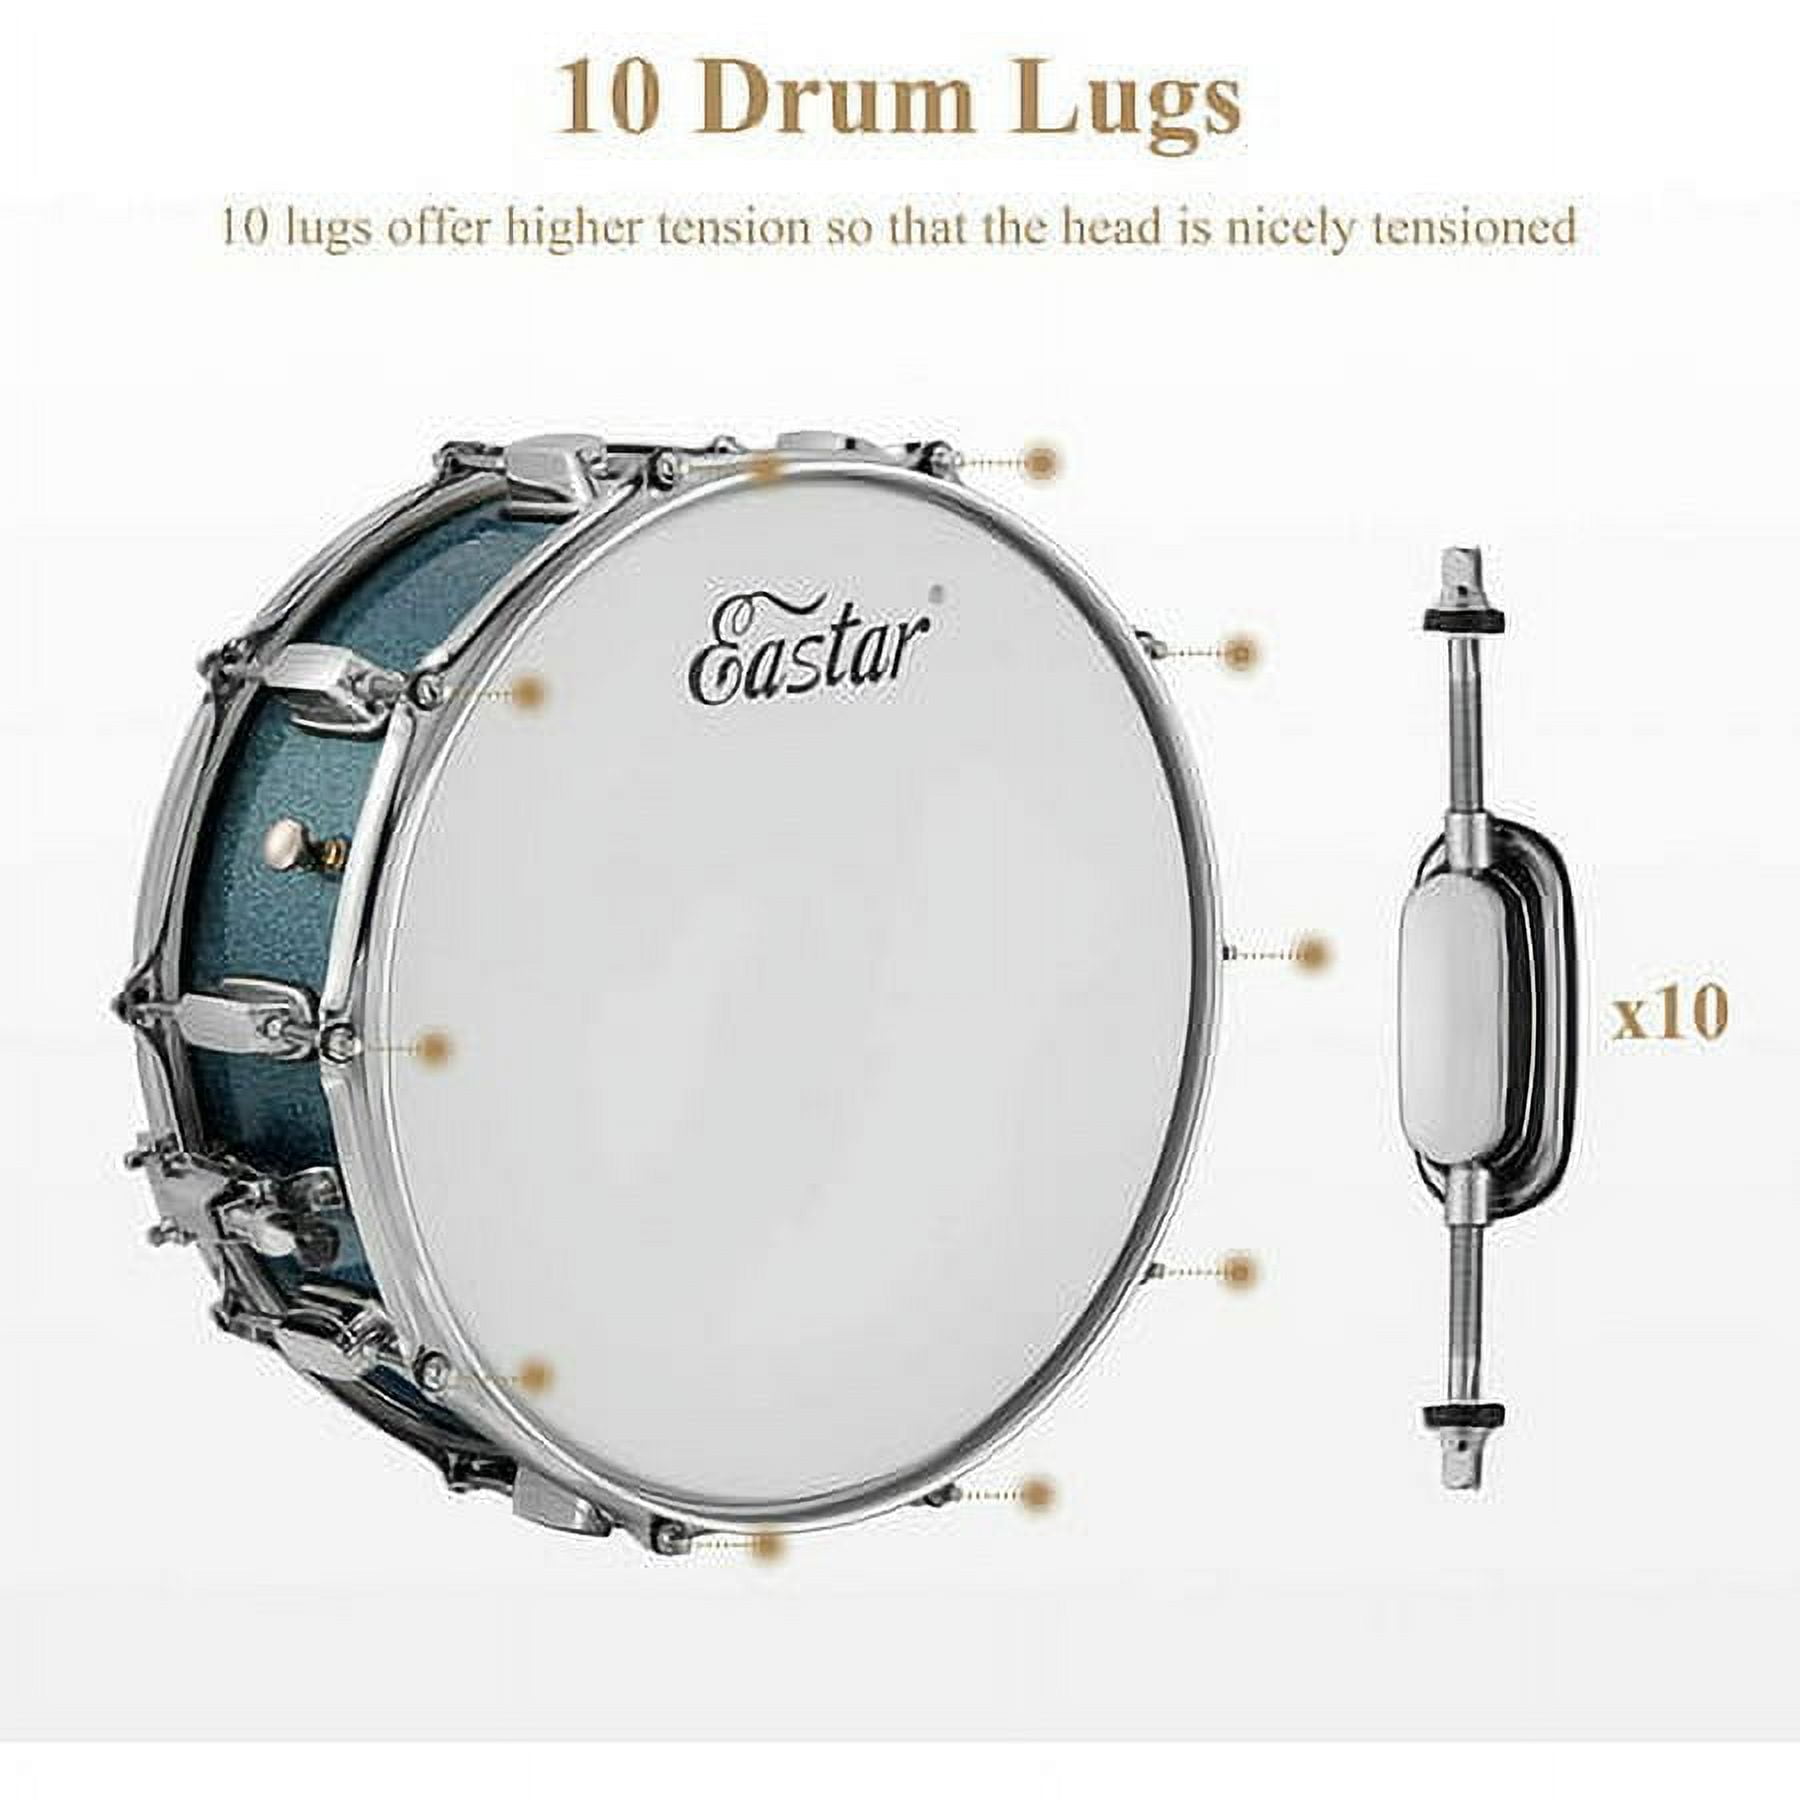 Stand, Eastar Mute Starry Drum Practice Set Snare Beginner Kit, Blue Student Pad with Sticks,